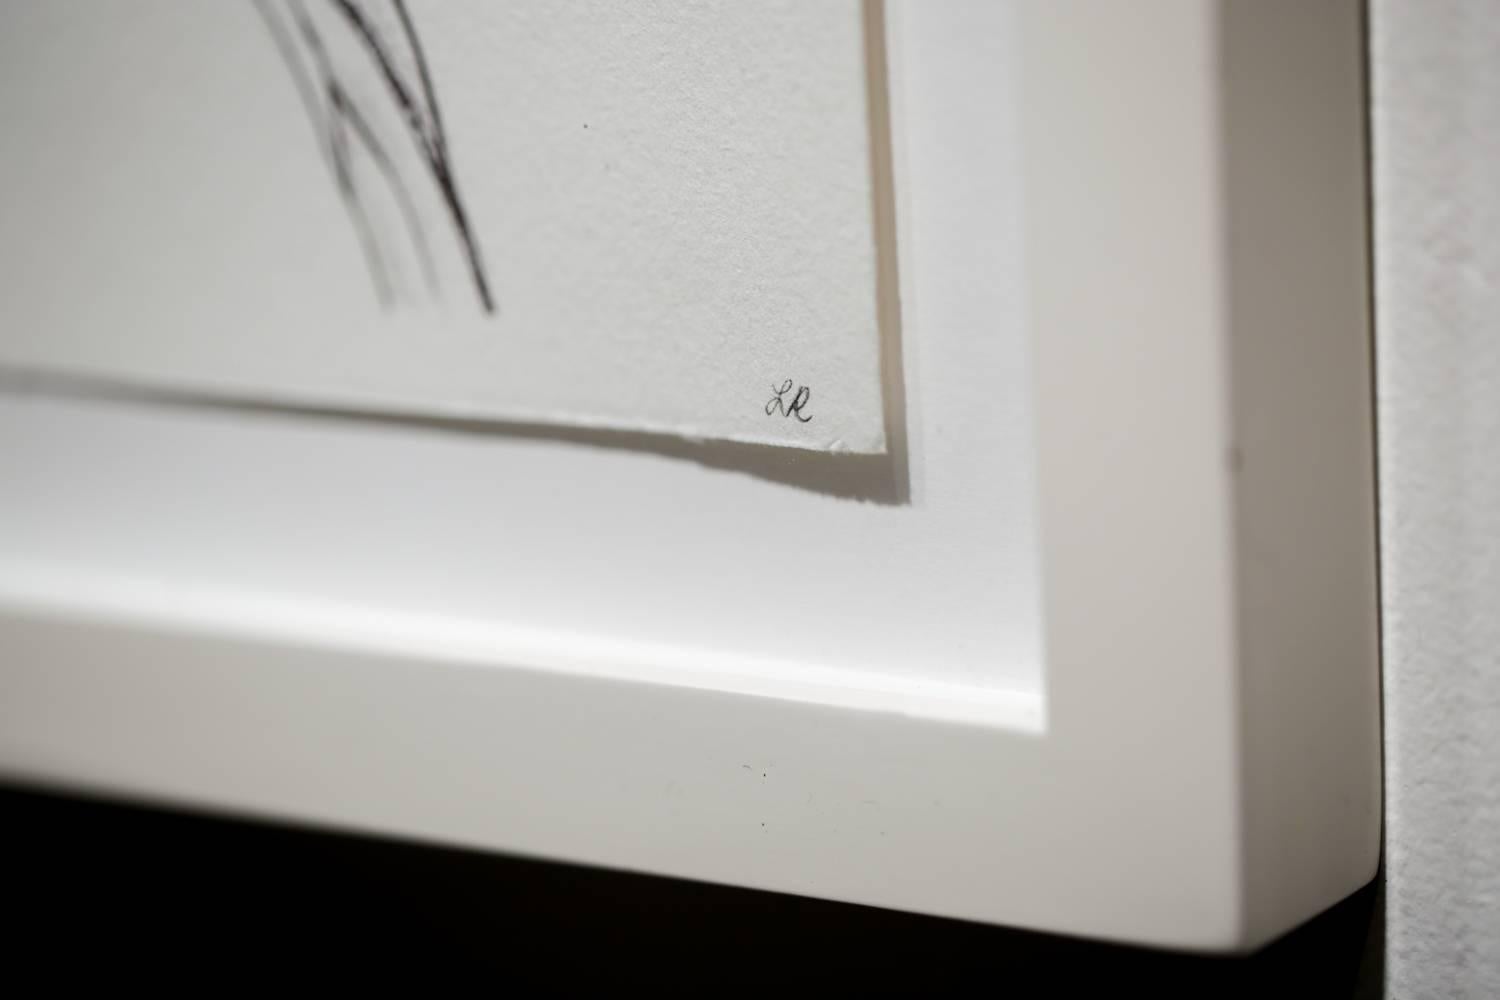 Original drawing by Lauren Rinaldi float mounted in the pictured simple white frame measuring 17in x 14in. This is an original artwork made with colored pencil, ballpoint pen, graphite on paper and debuted during the group exhibition titled 